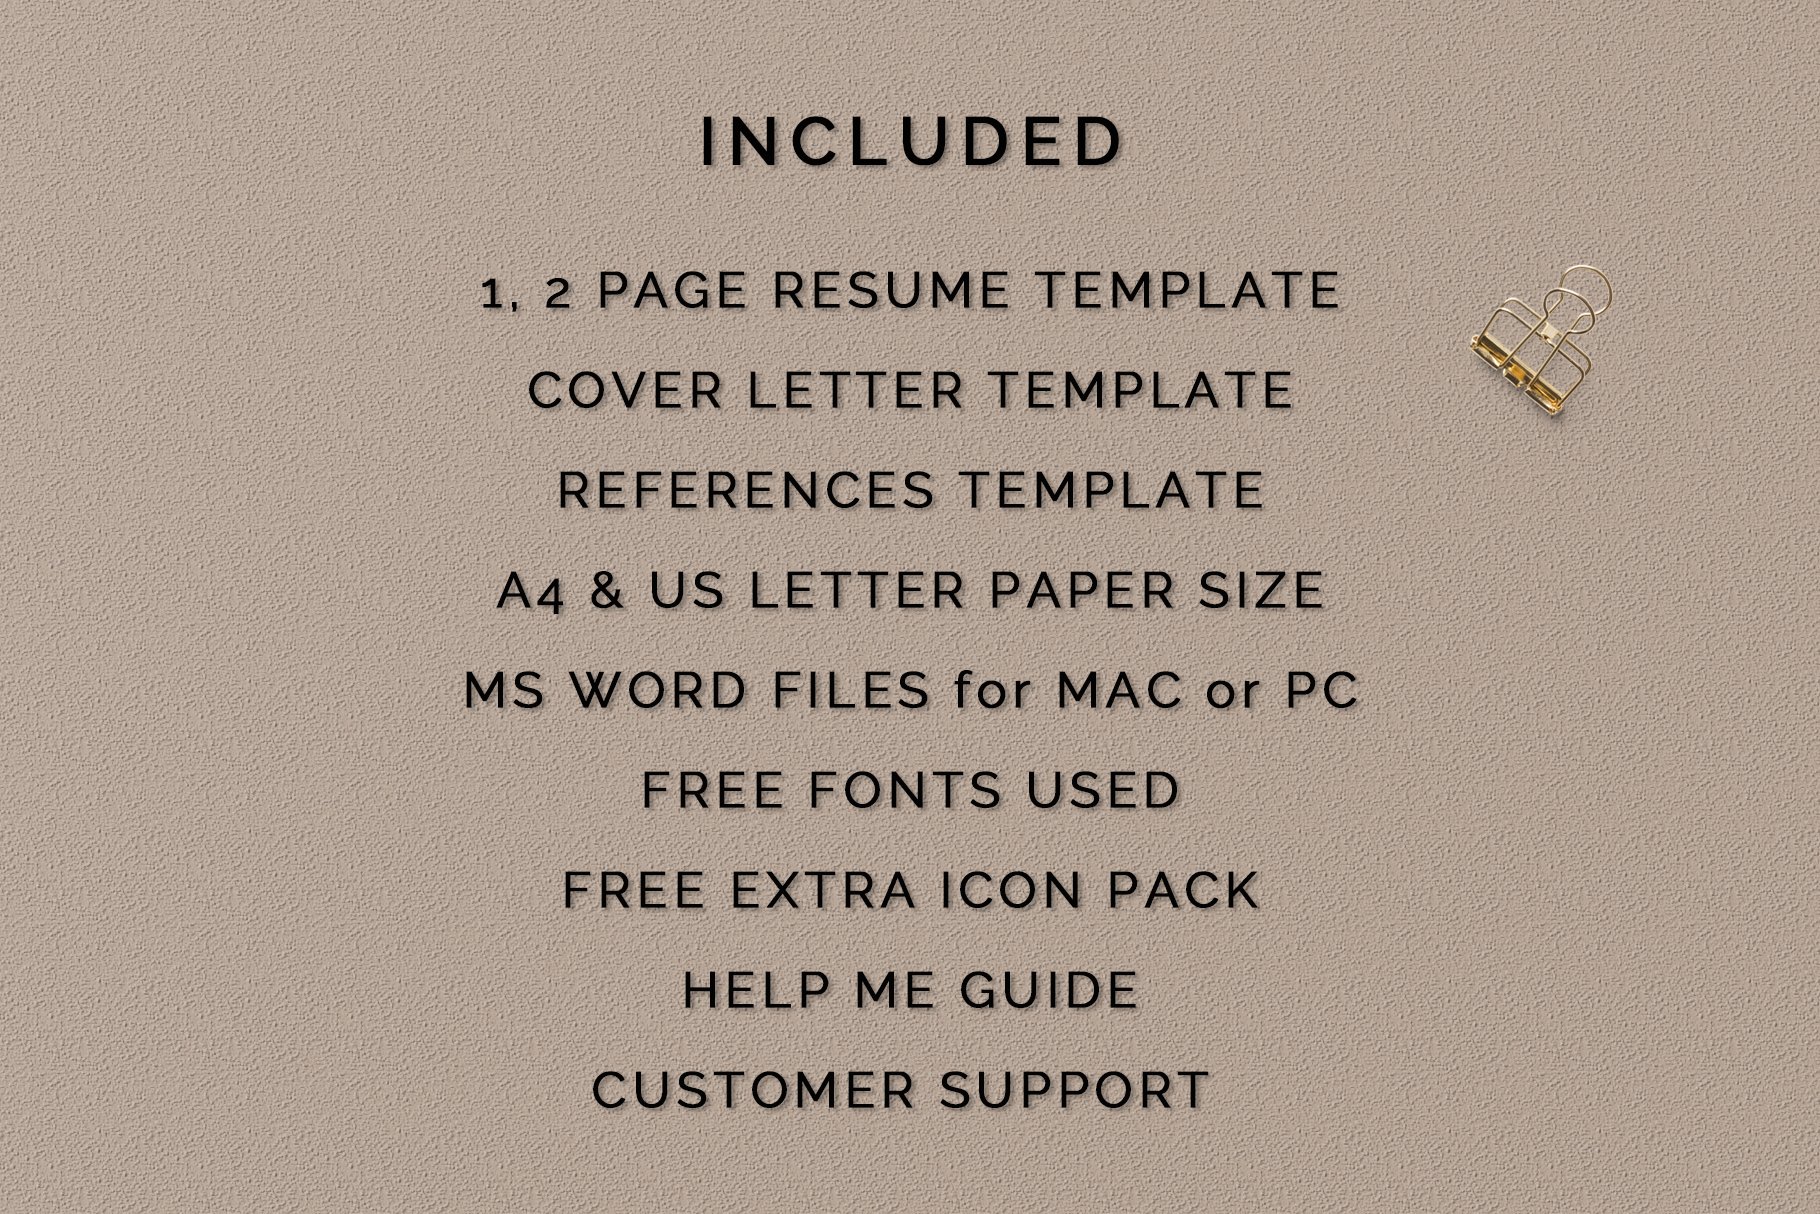 Resume cover letter template with a key.